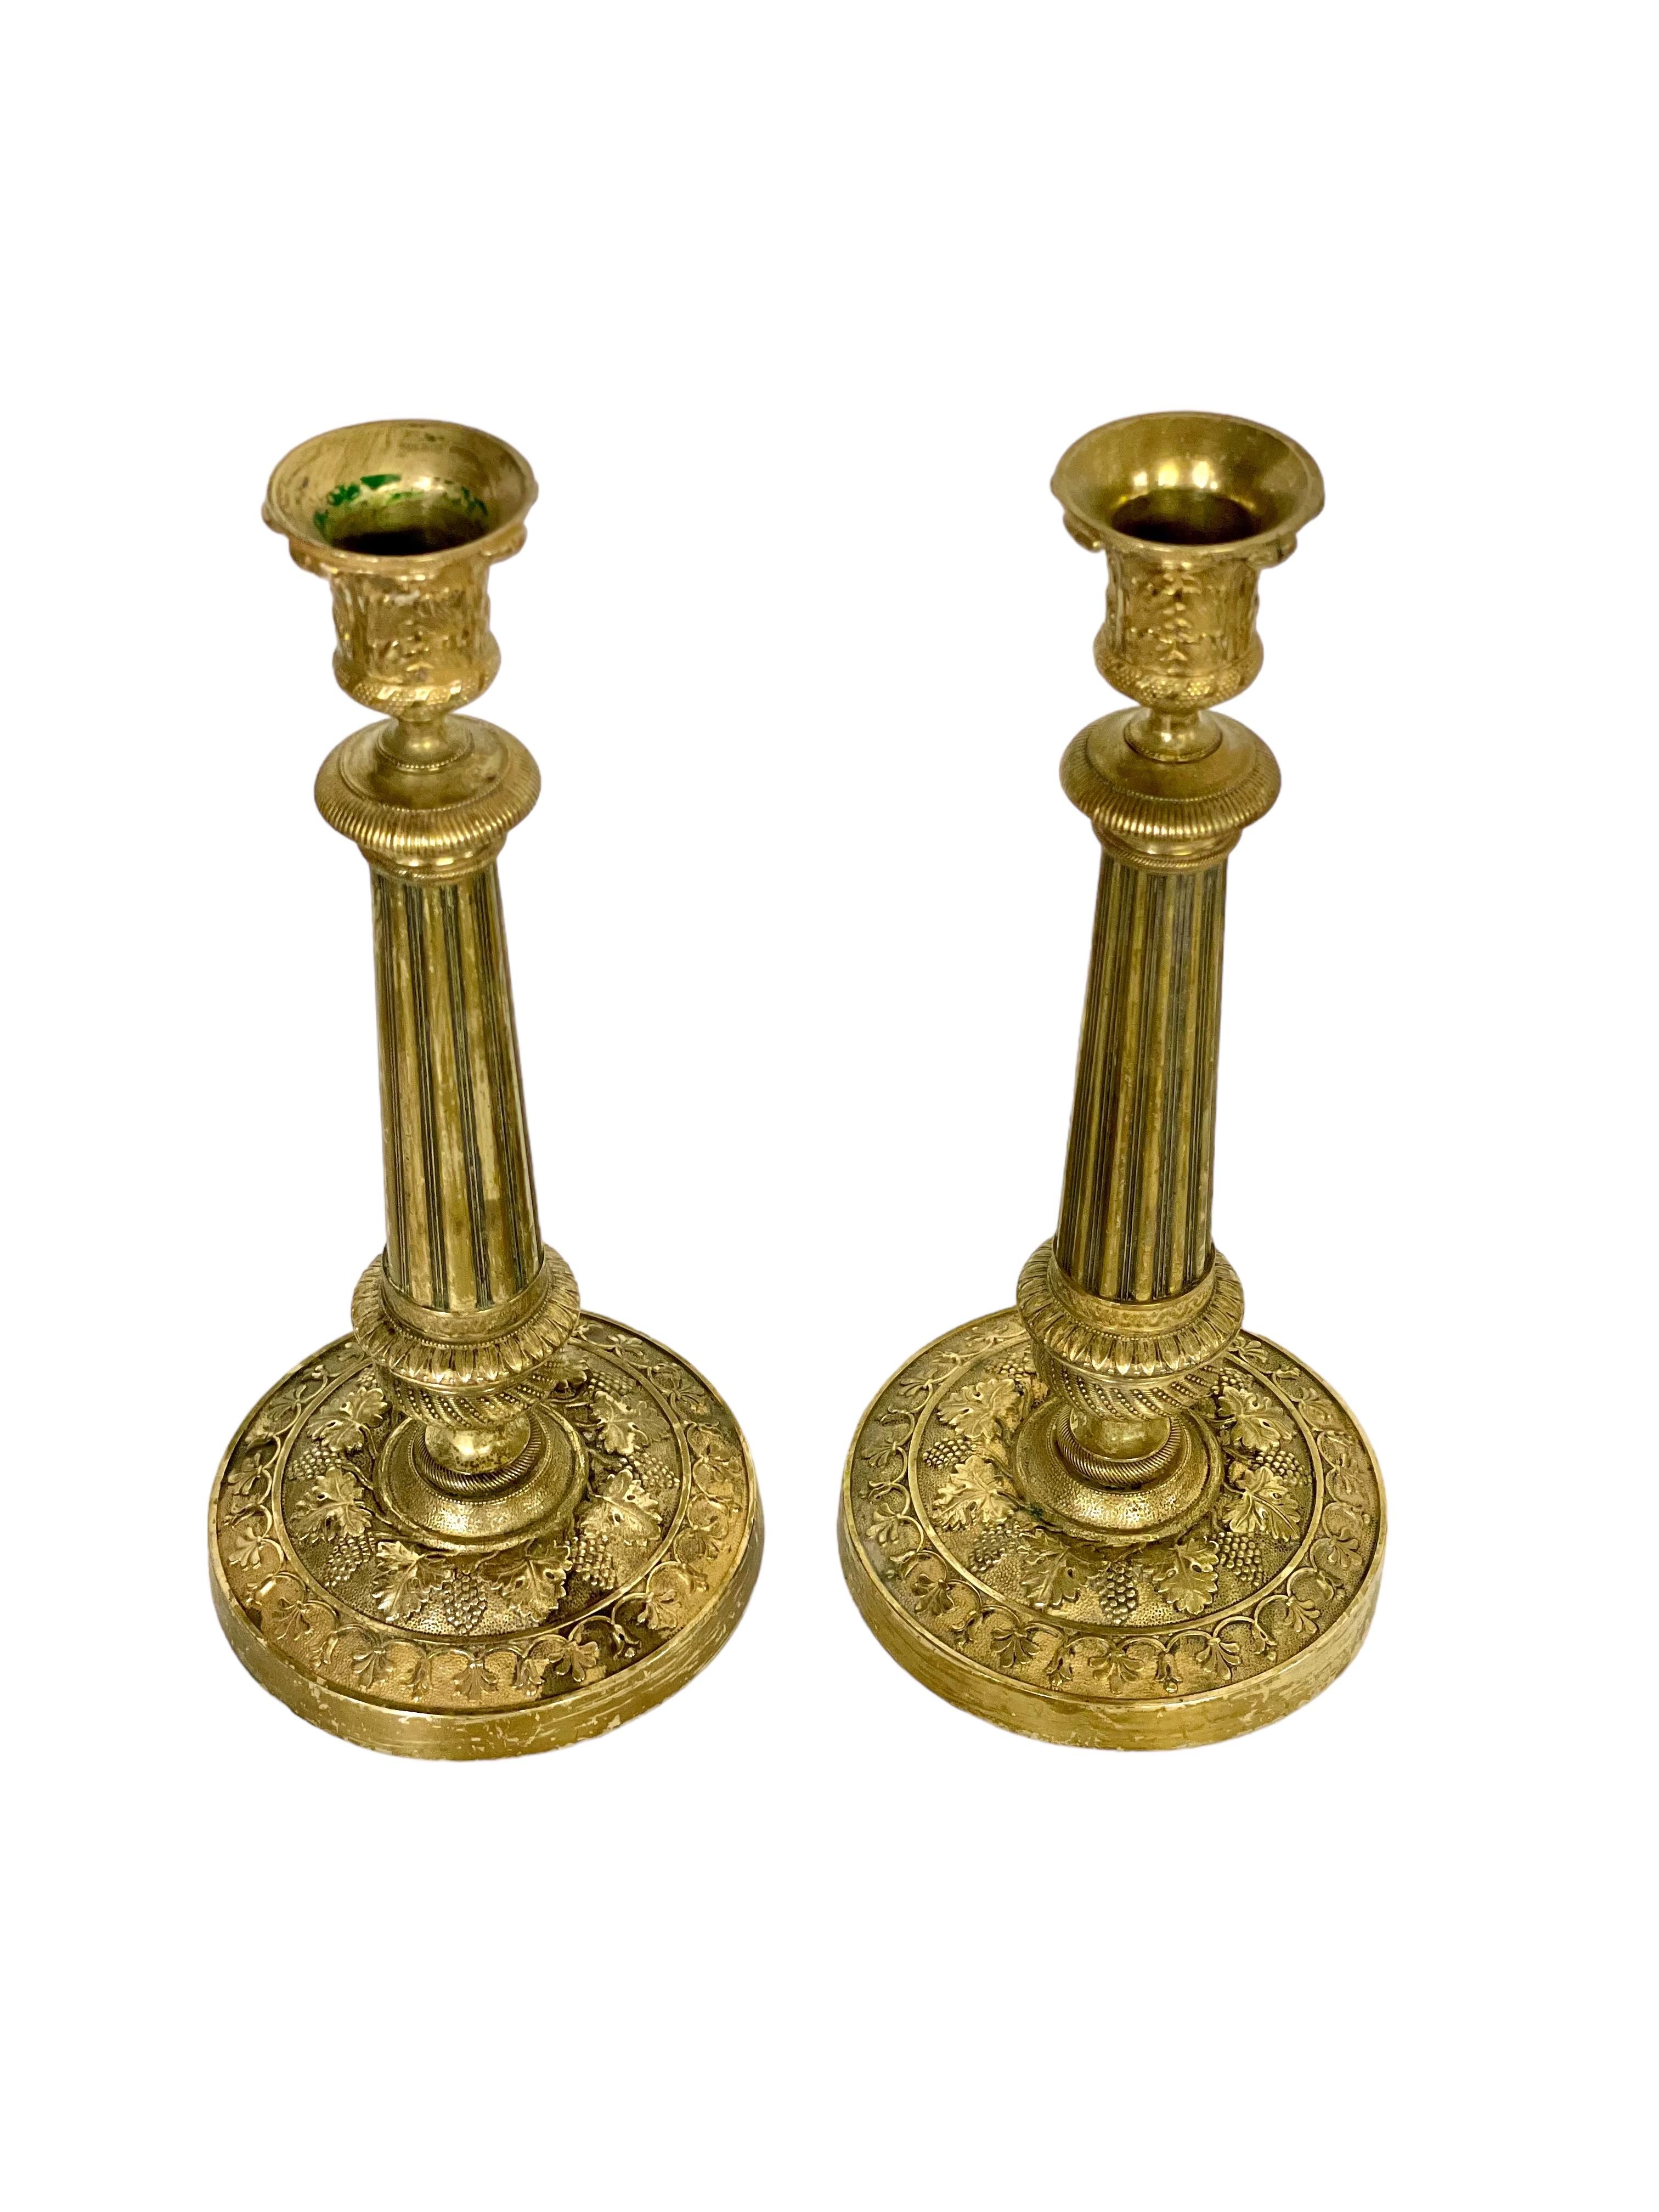 A pair of very finely-chiselled French gilt bronze candlesticks crafted in the neoclassical style. The decoration is extremely intricate, particularly on the circular base and tulip-shaped capitals, with encircling bands of grapes and vine leaves,